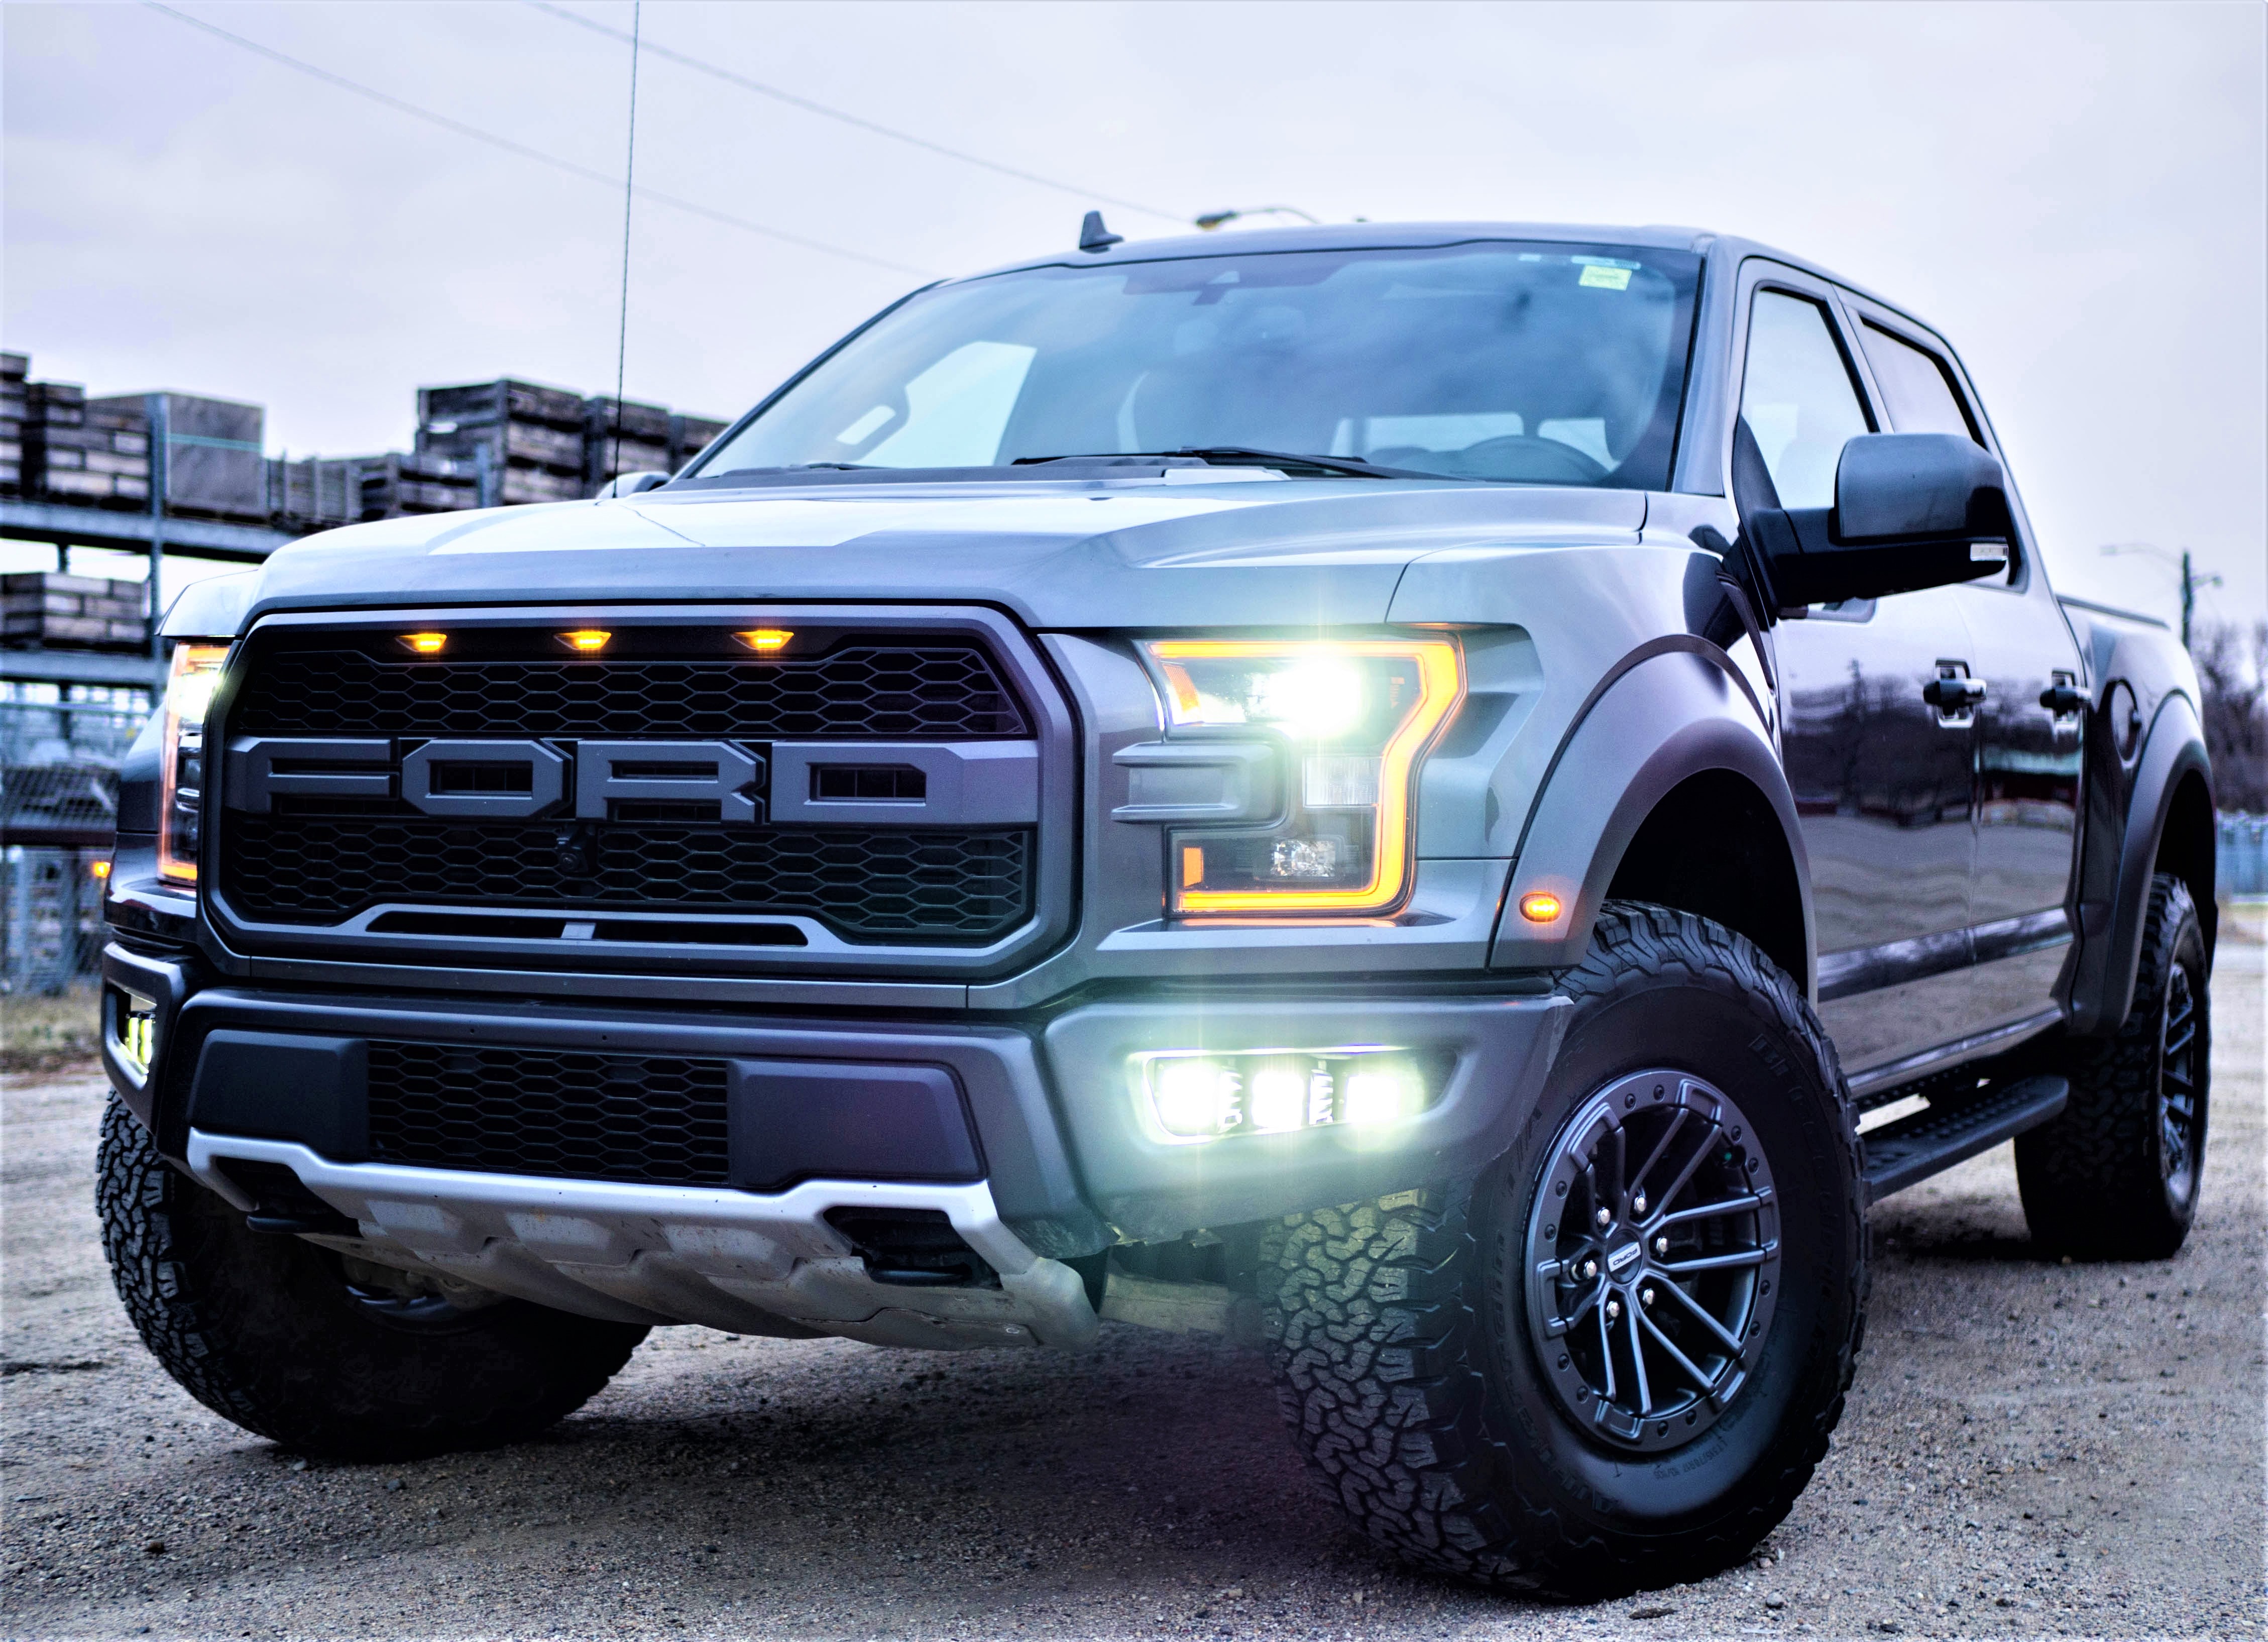 Auto stock Ford enjoys the strong gains